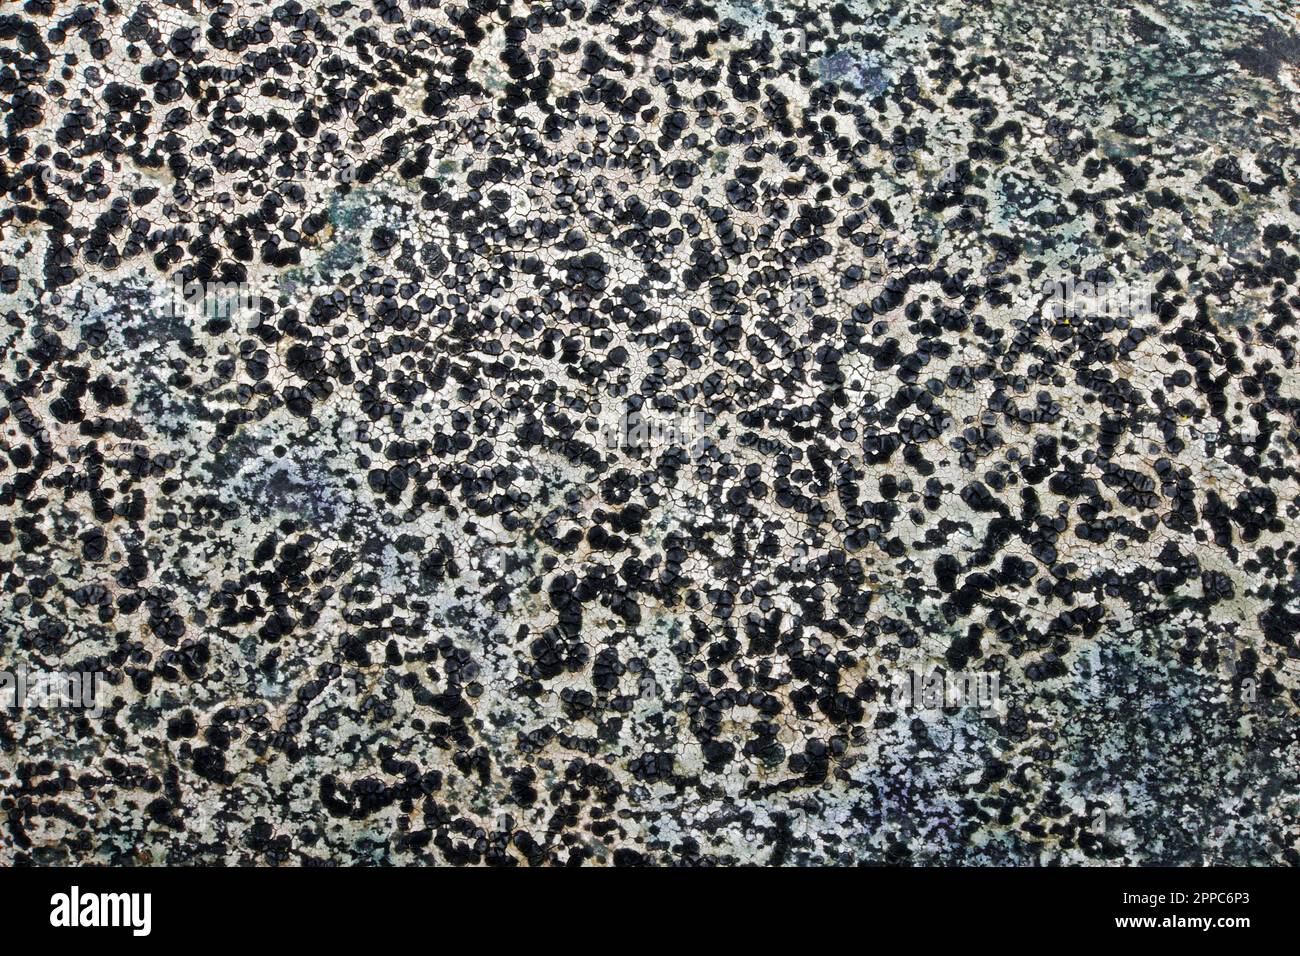 Buellia aethalea is a crustose lichen found on acidic rock. The pictures here are on slate. It has a global distribution. Stock Photo